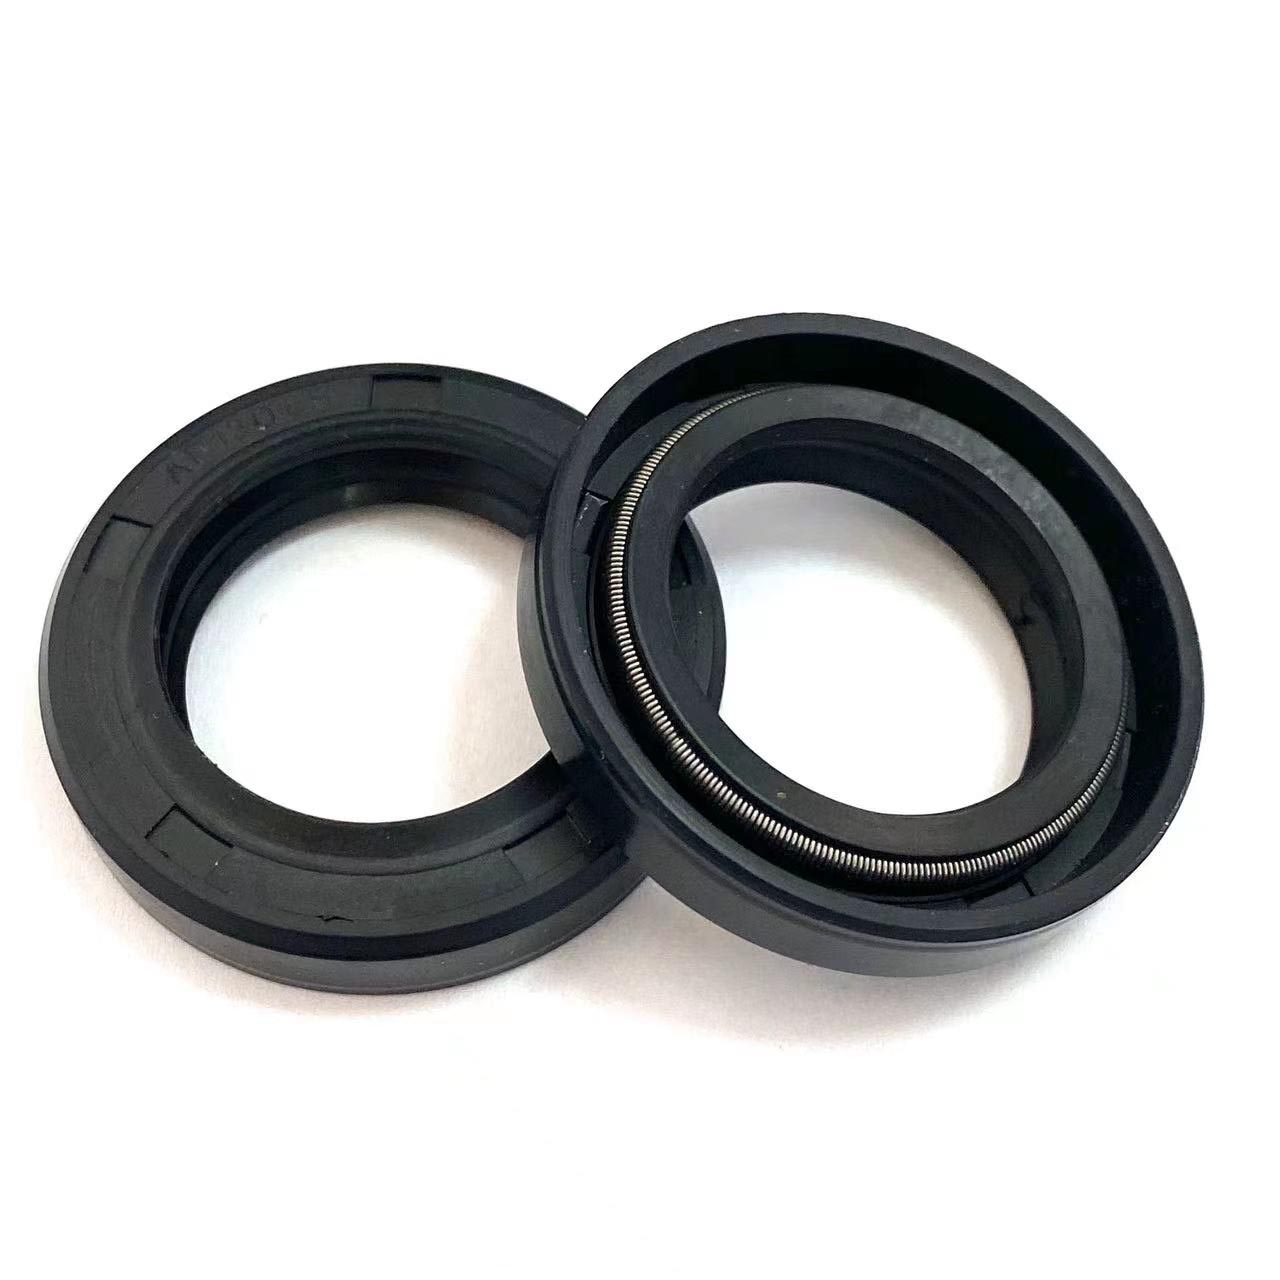 XTSEAO High quality Black Rubber NBR Power steering oil seal 25*38*7/7.8 OE AP1306H for TOY OTA Steering Rack Seal Replacement